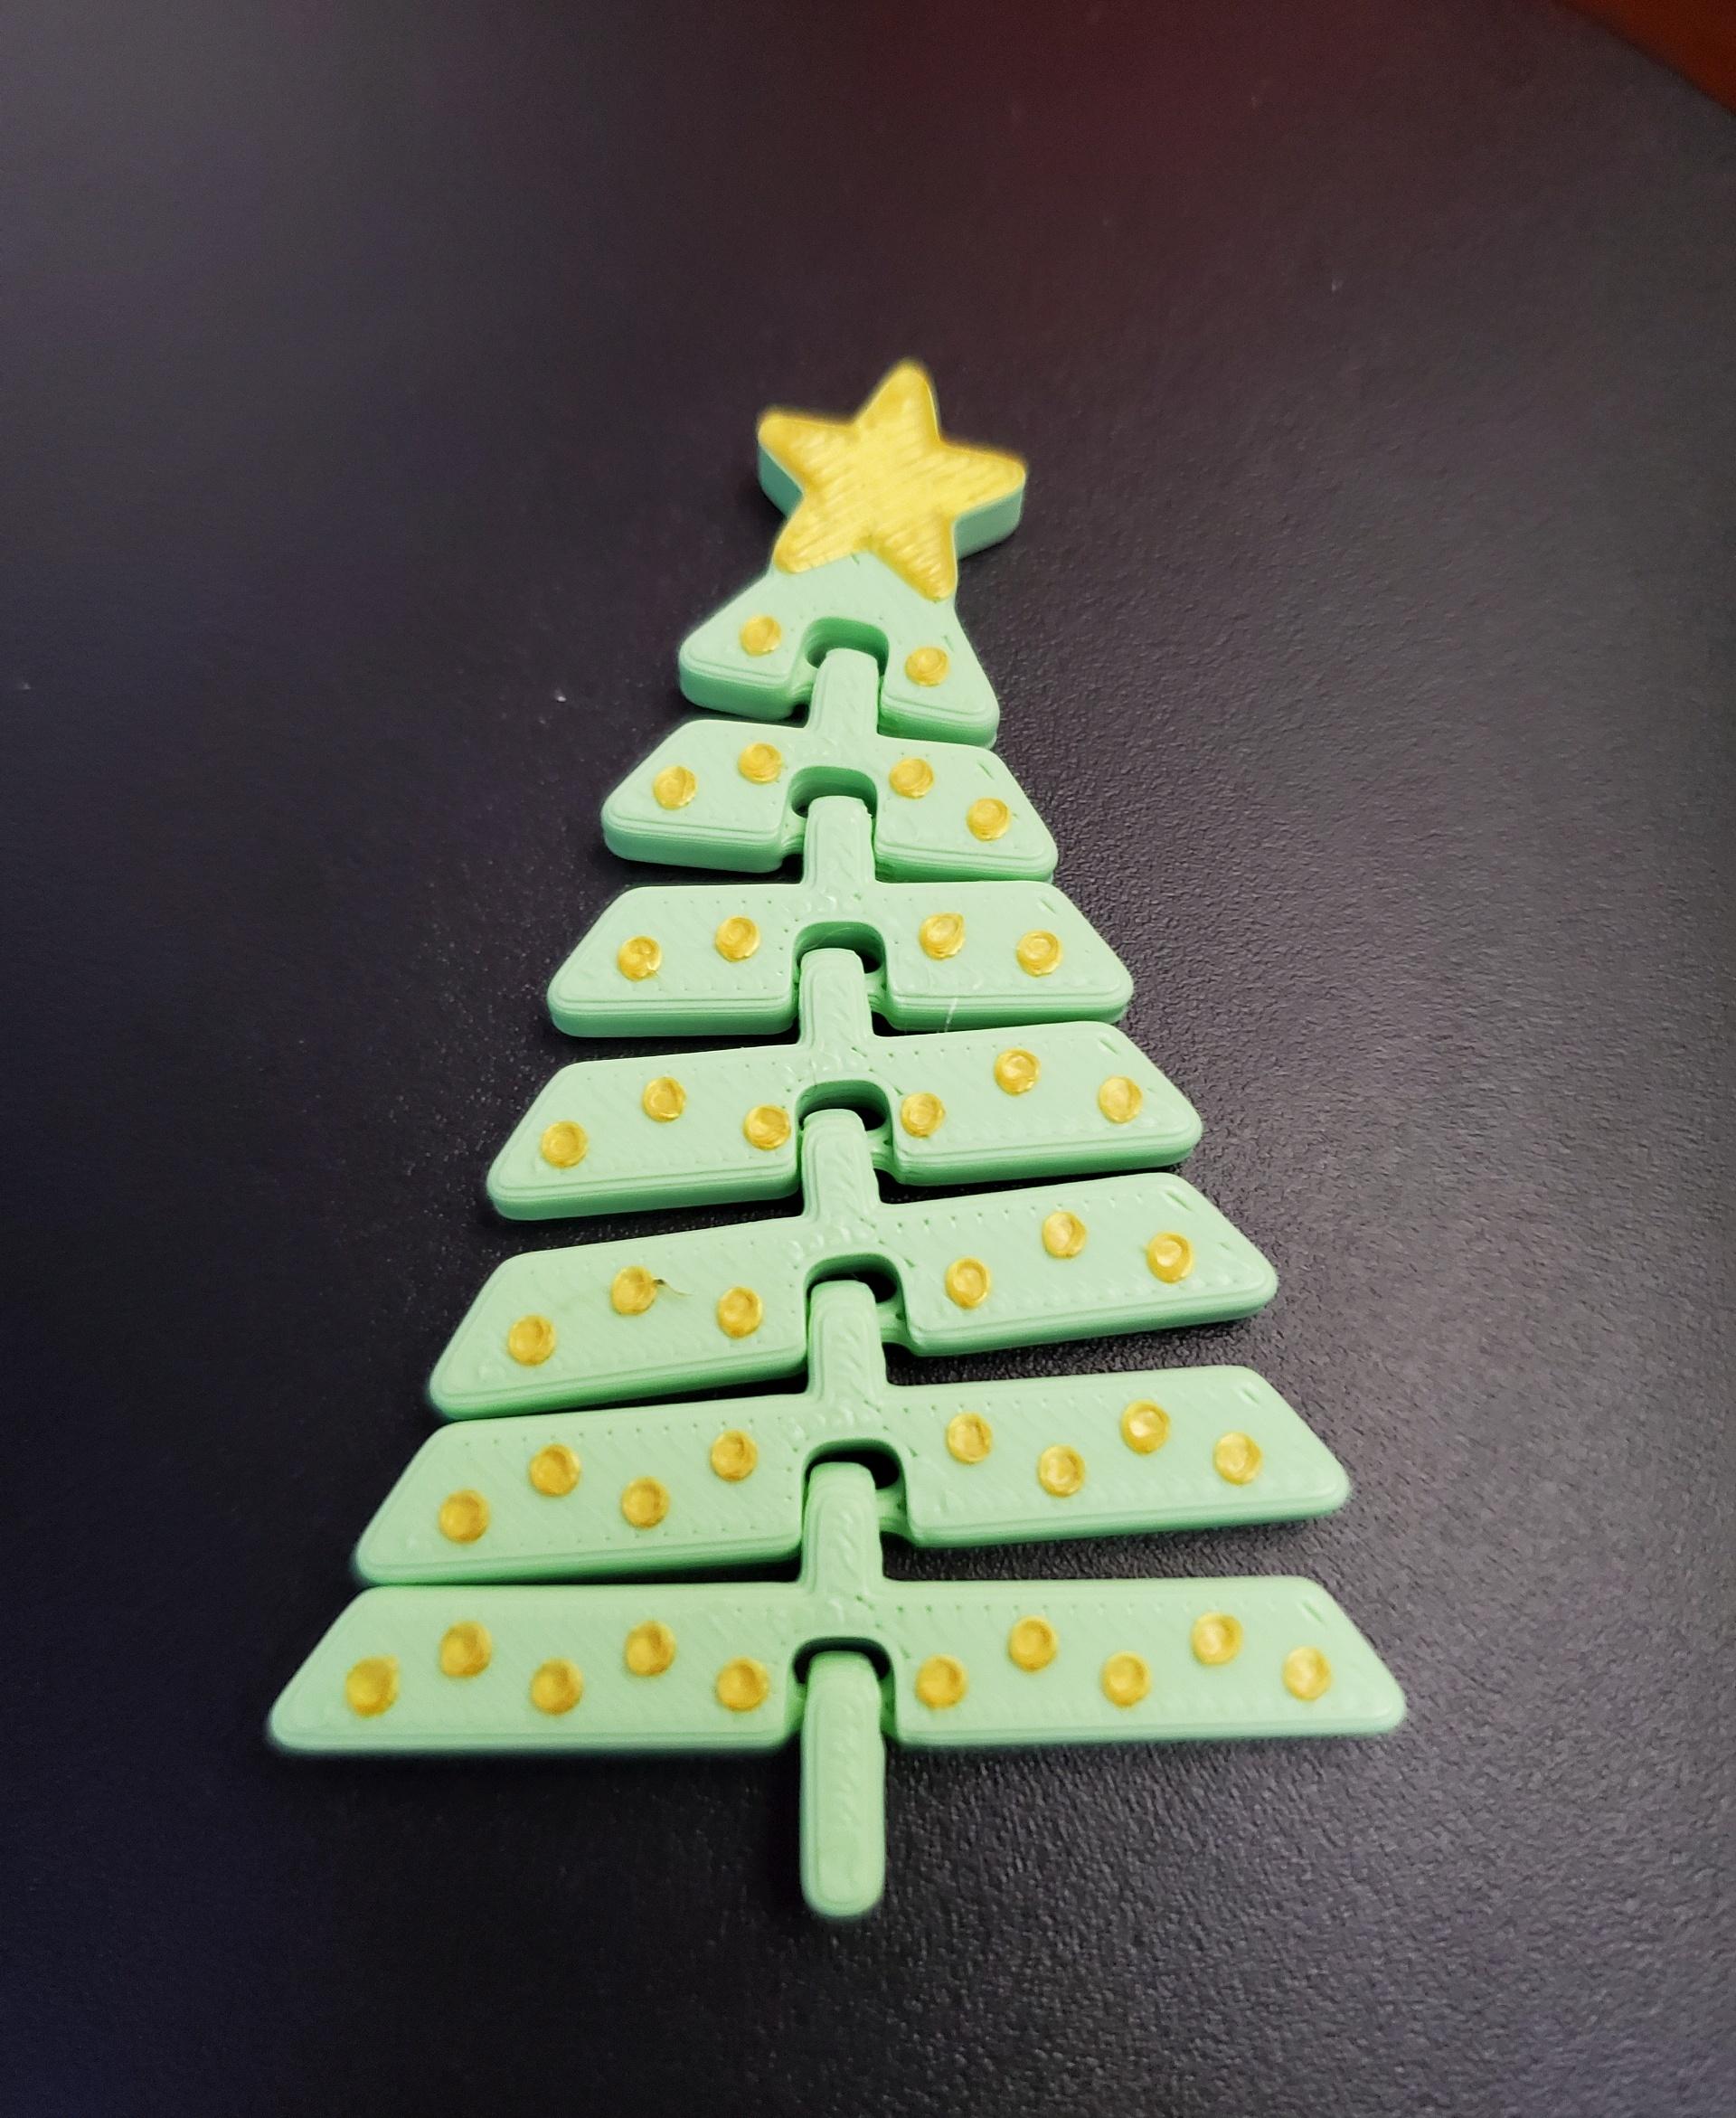 Articulated Christmas Tree with Star and Ornaments - Print in place fidget toys - 3mf - 3Dfuel Pistachio green - 3d model